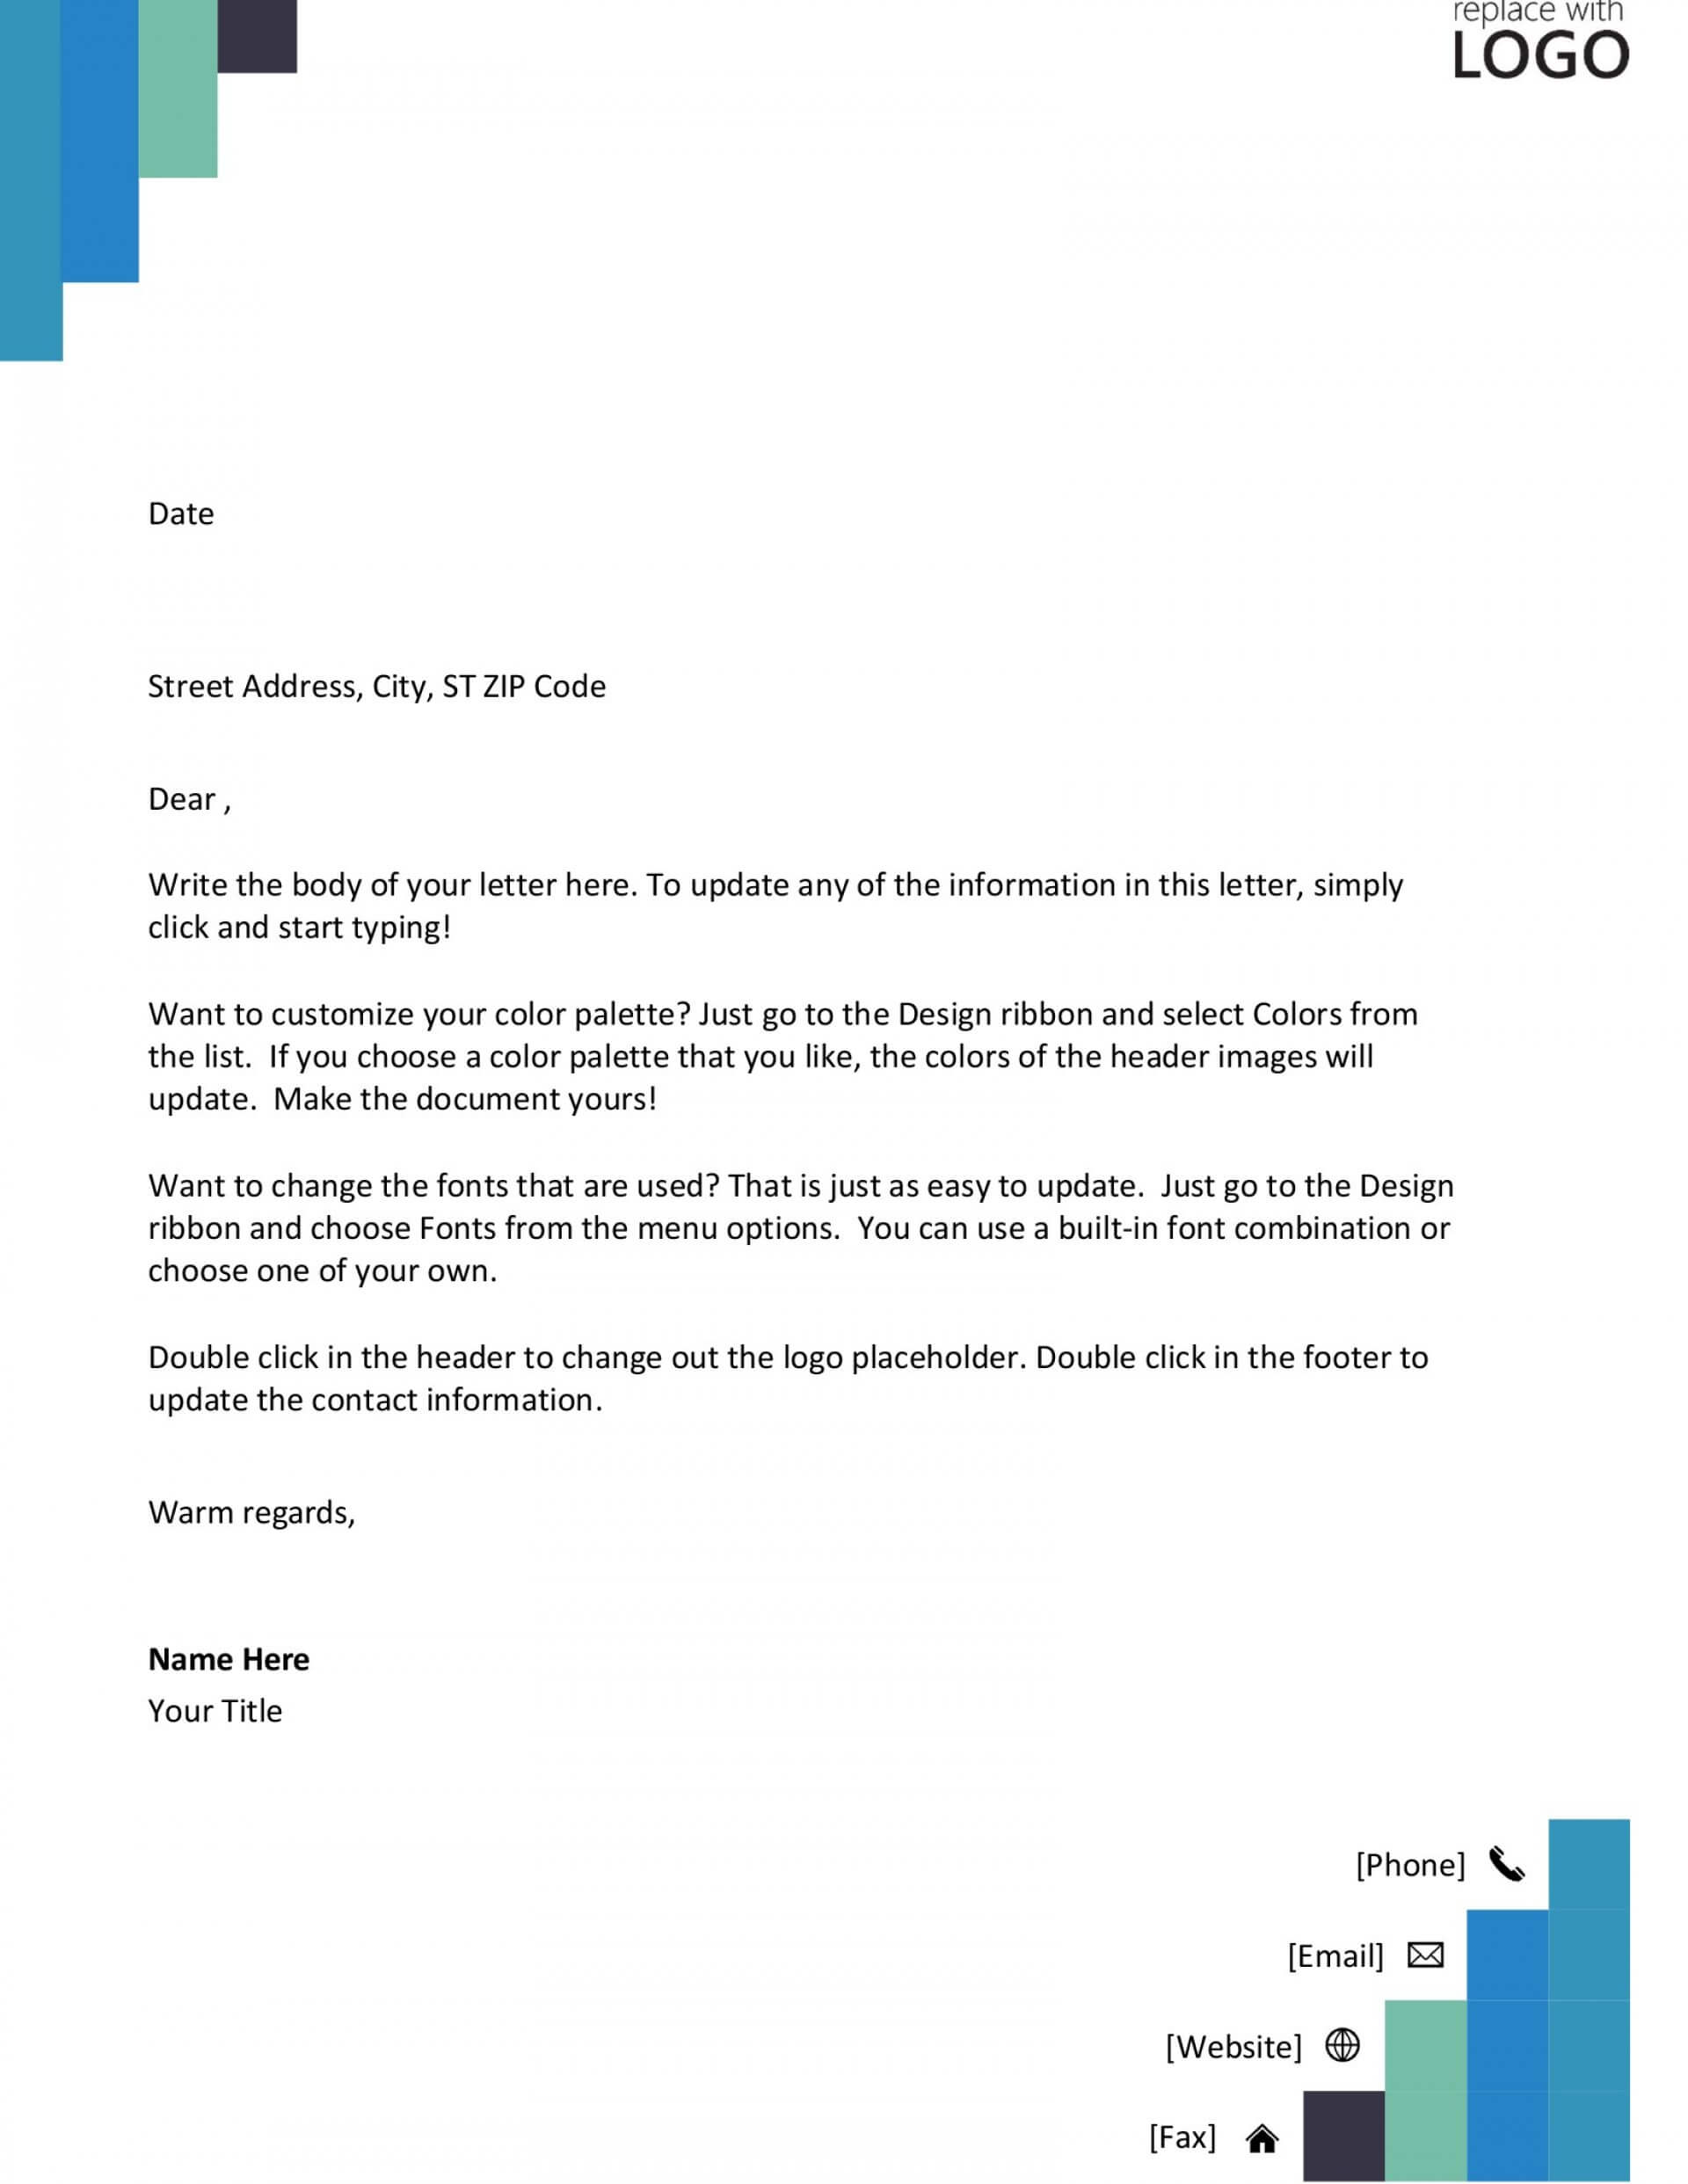 011 Letter Of Interest Template Microsoft Word Sweep11 Ideas With Regard To Letter Of Interest Template Microsoft Word